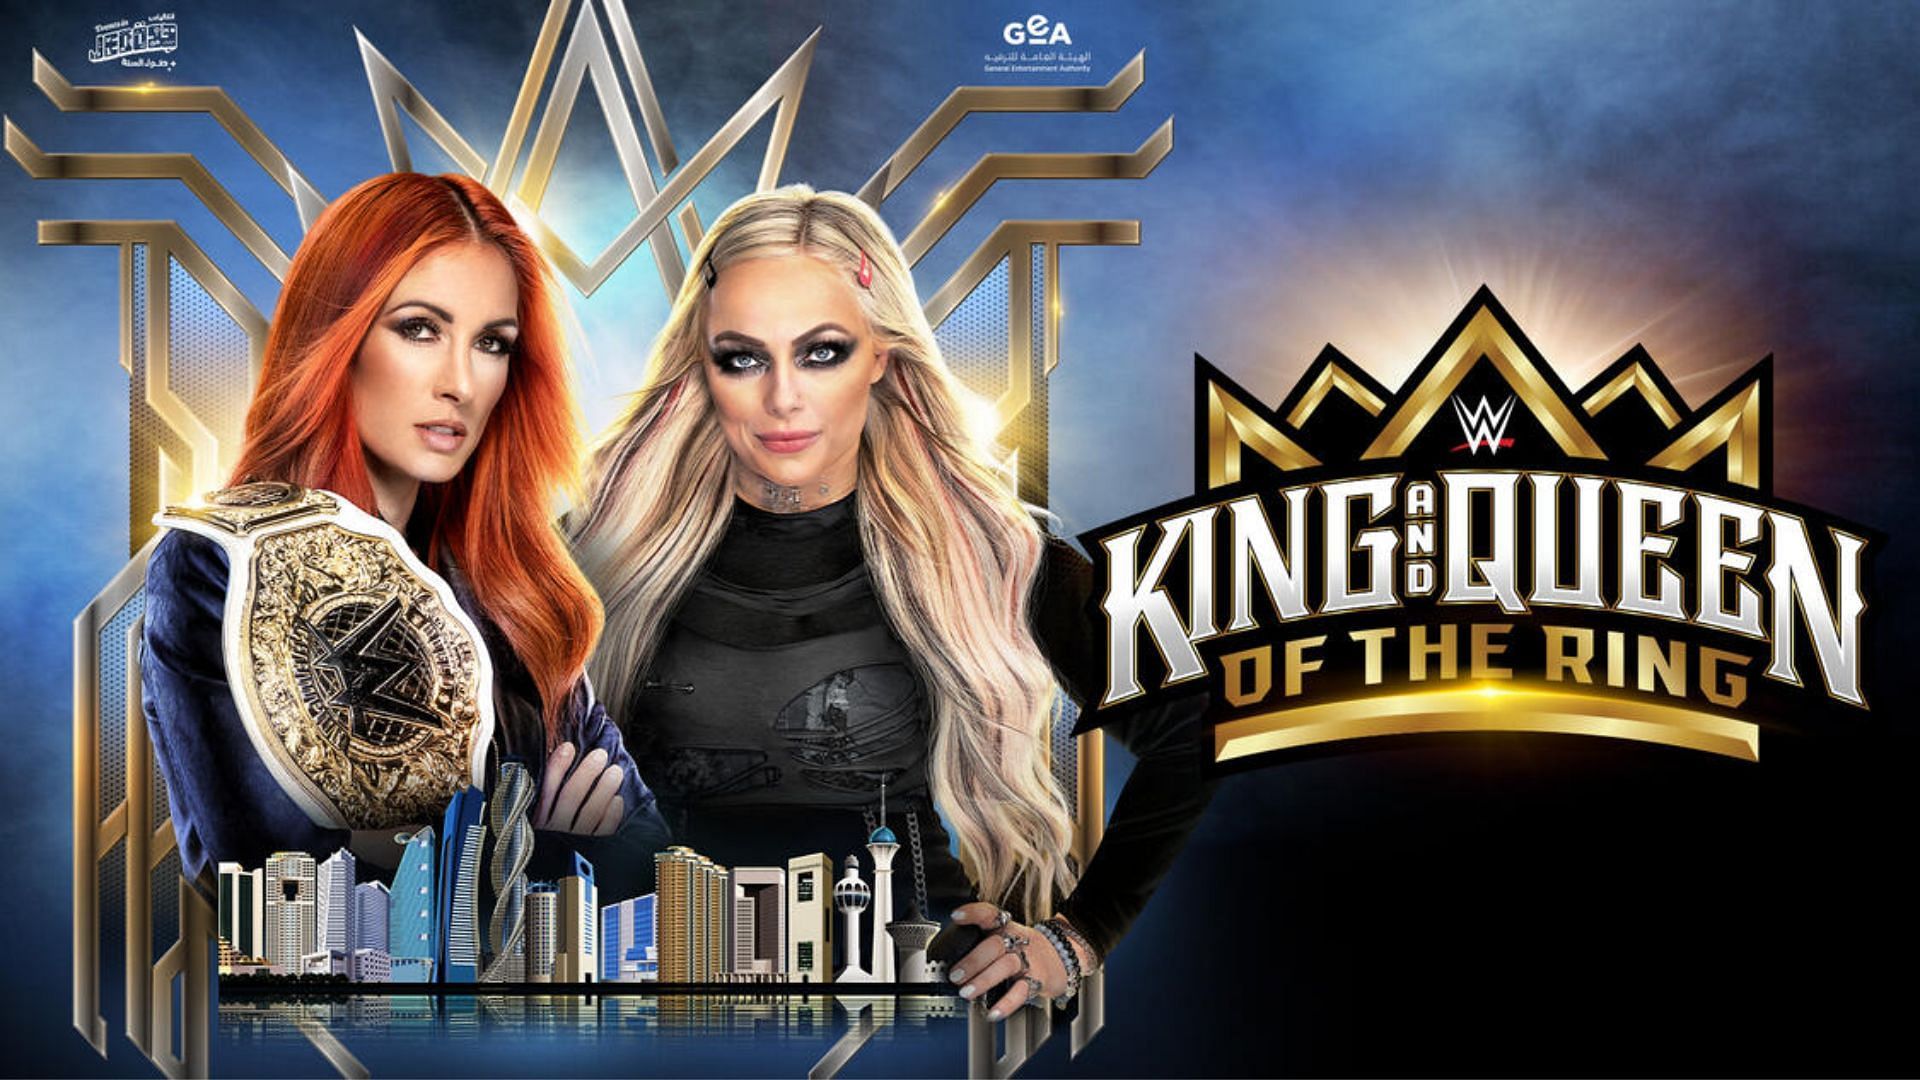 King and Queen of the Ring will take place in Saudi Arabia